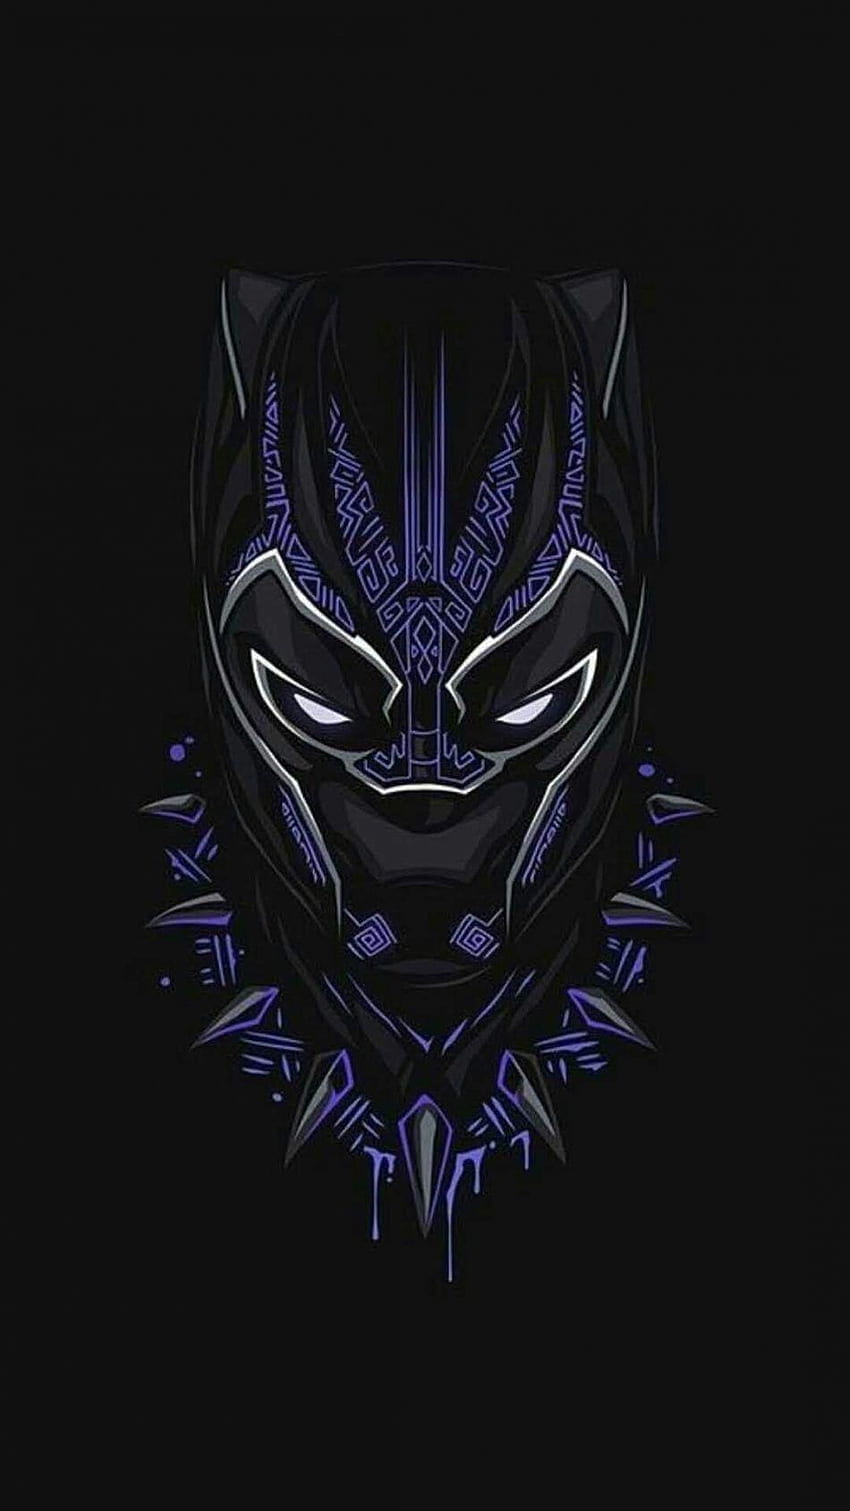 In honour of the king. RIP in 2020. Black panther marvel, Black panther , Black panther superhero HD phone wallpaper